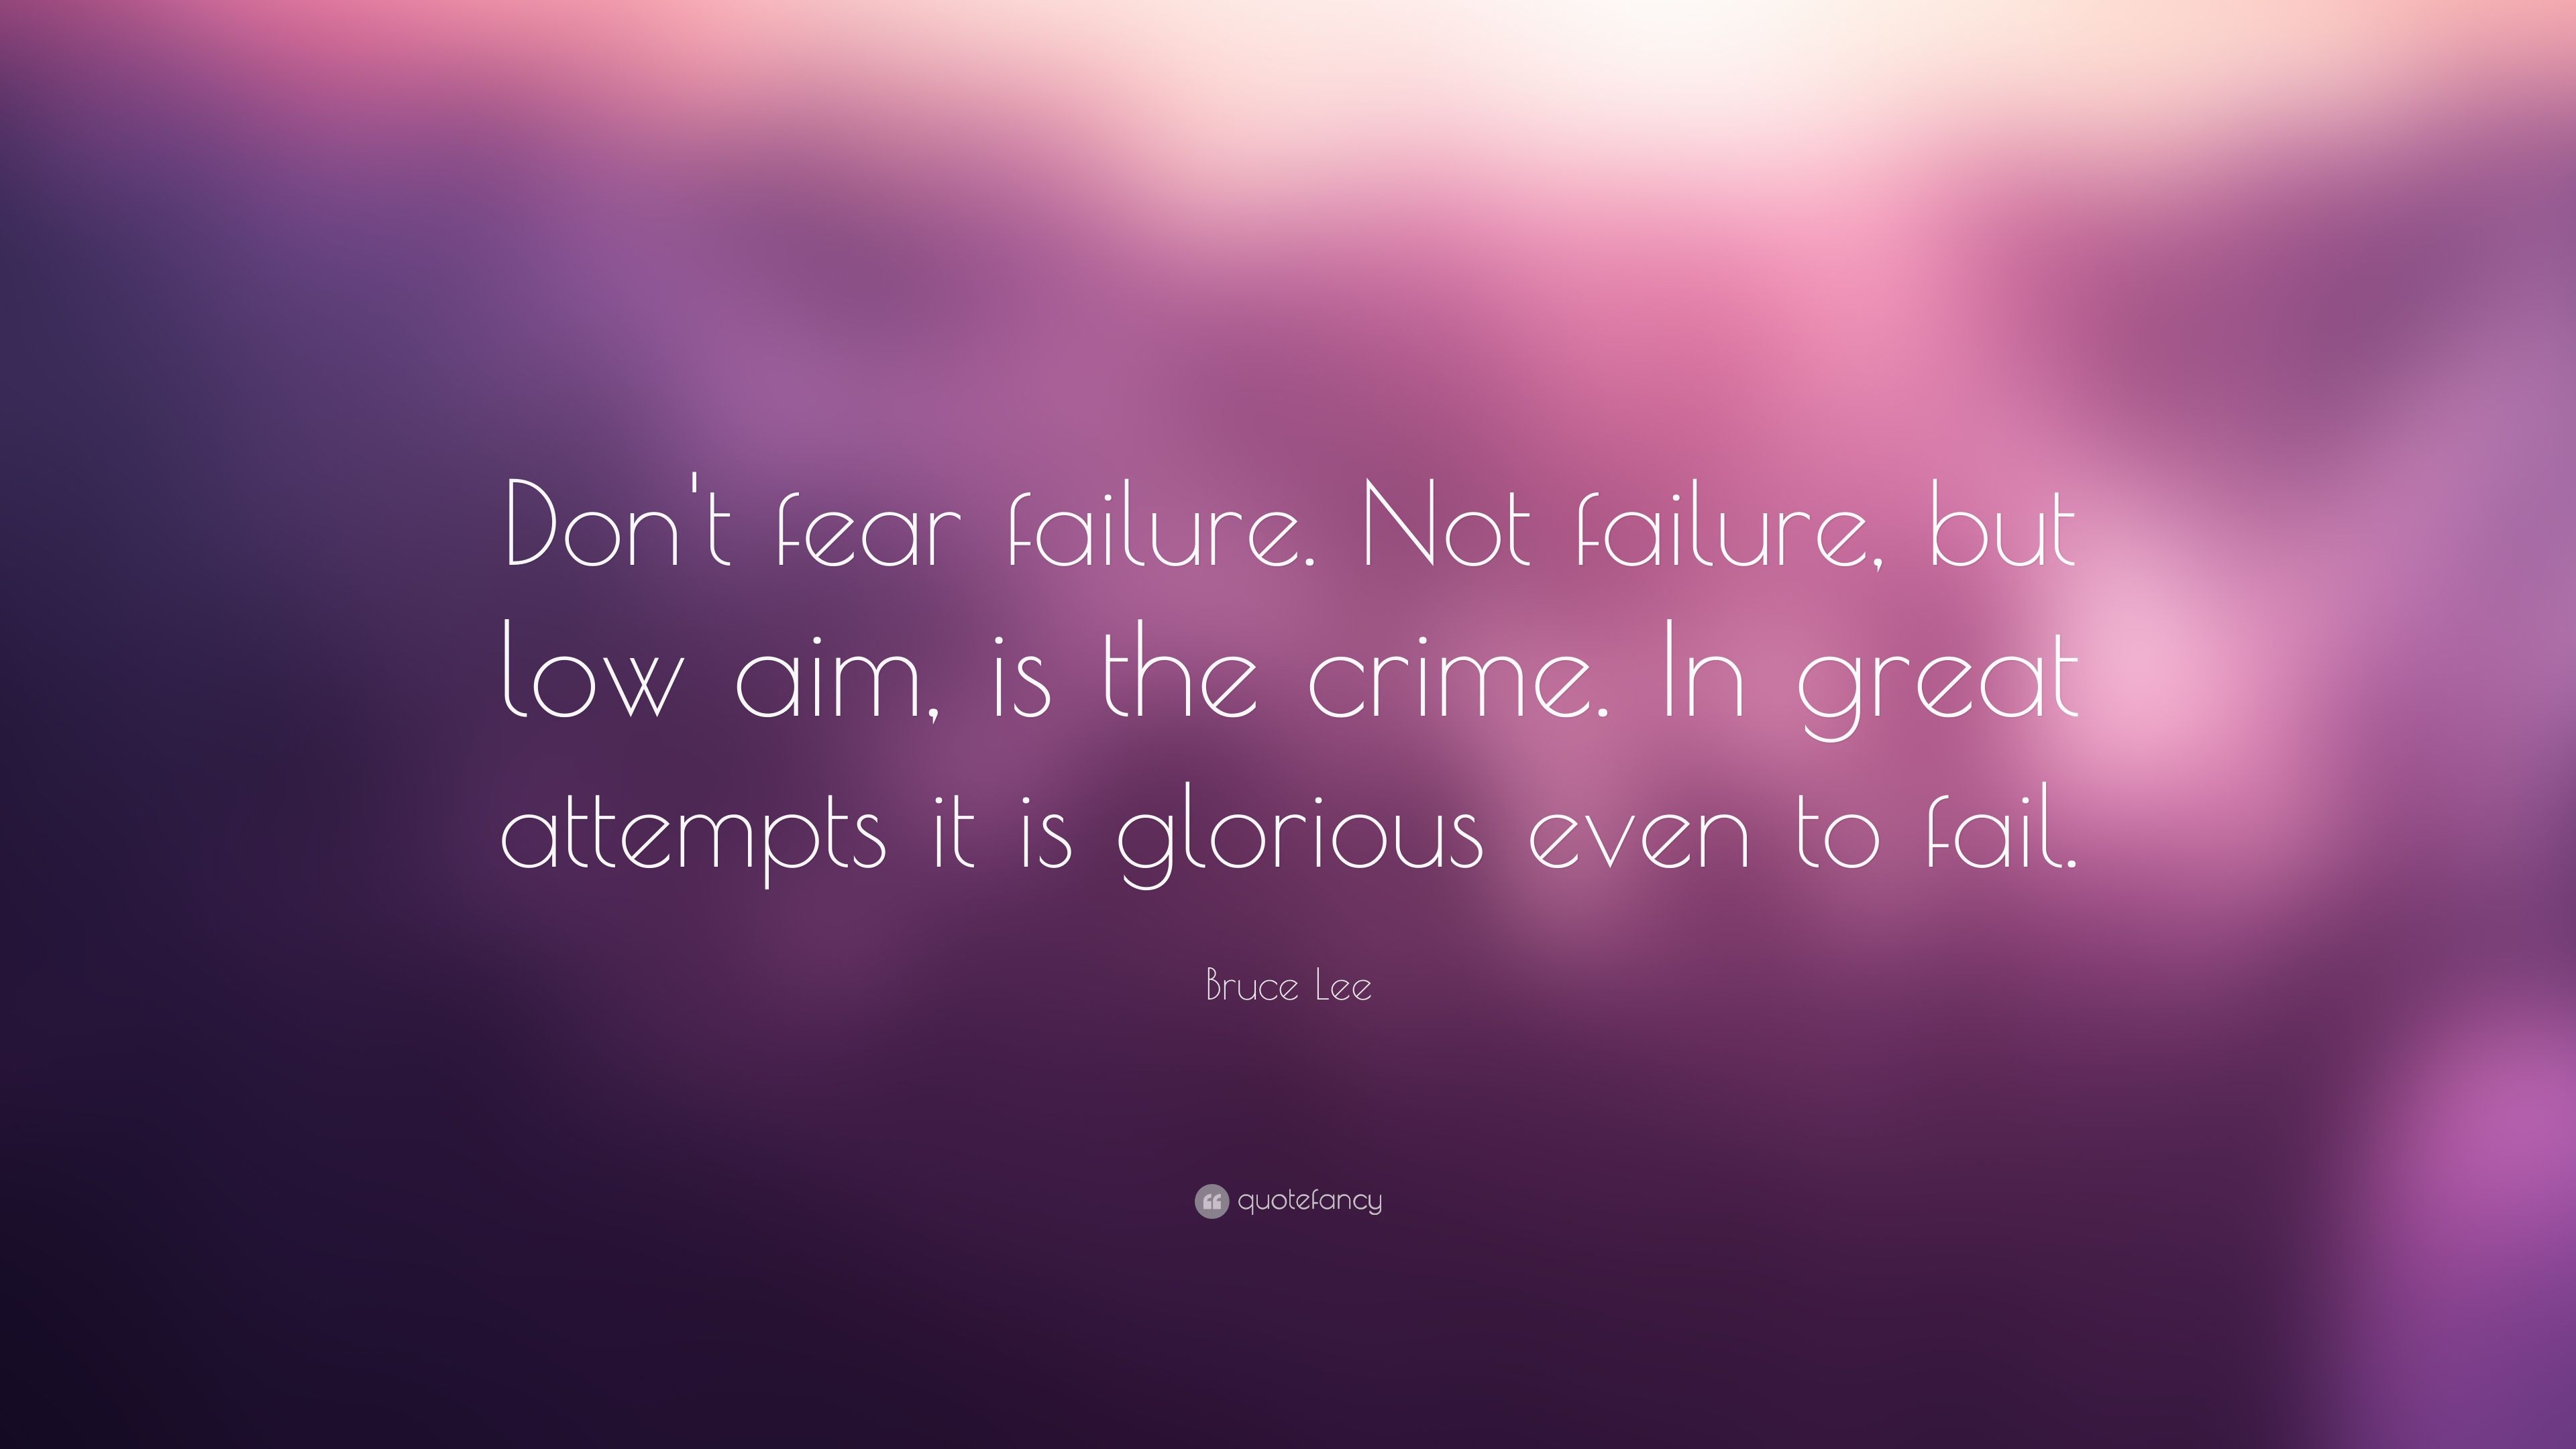 Bruce Lee Quote: “Don't fear failure. Not failure, but low aim, is ...